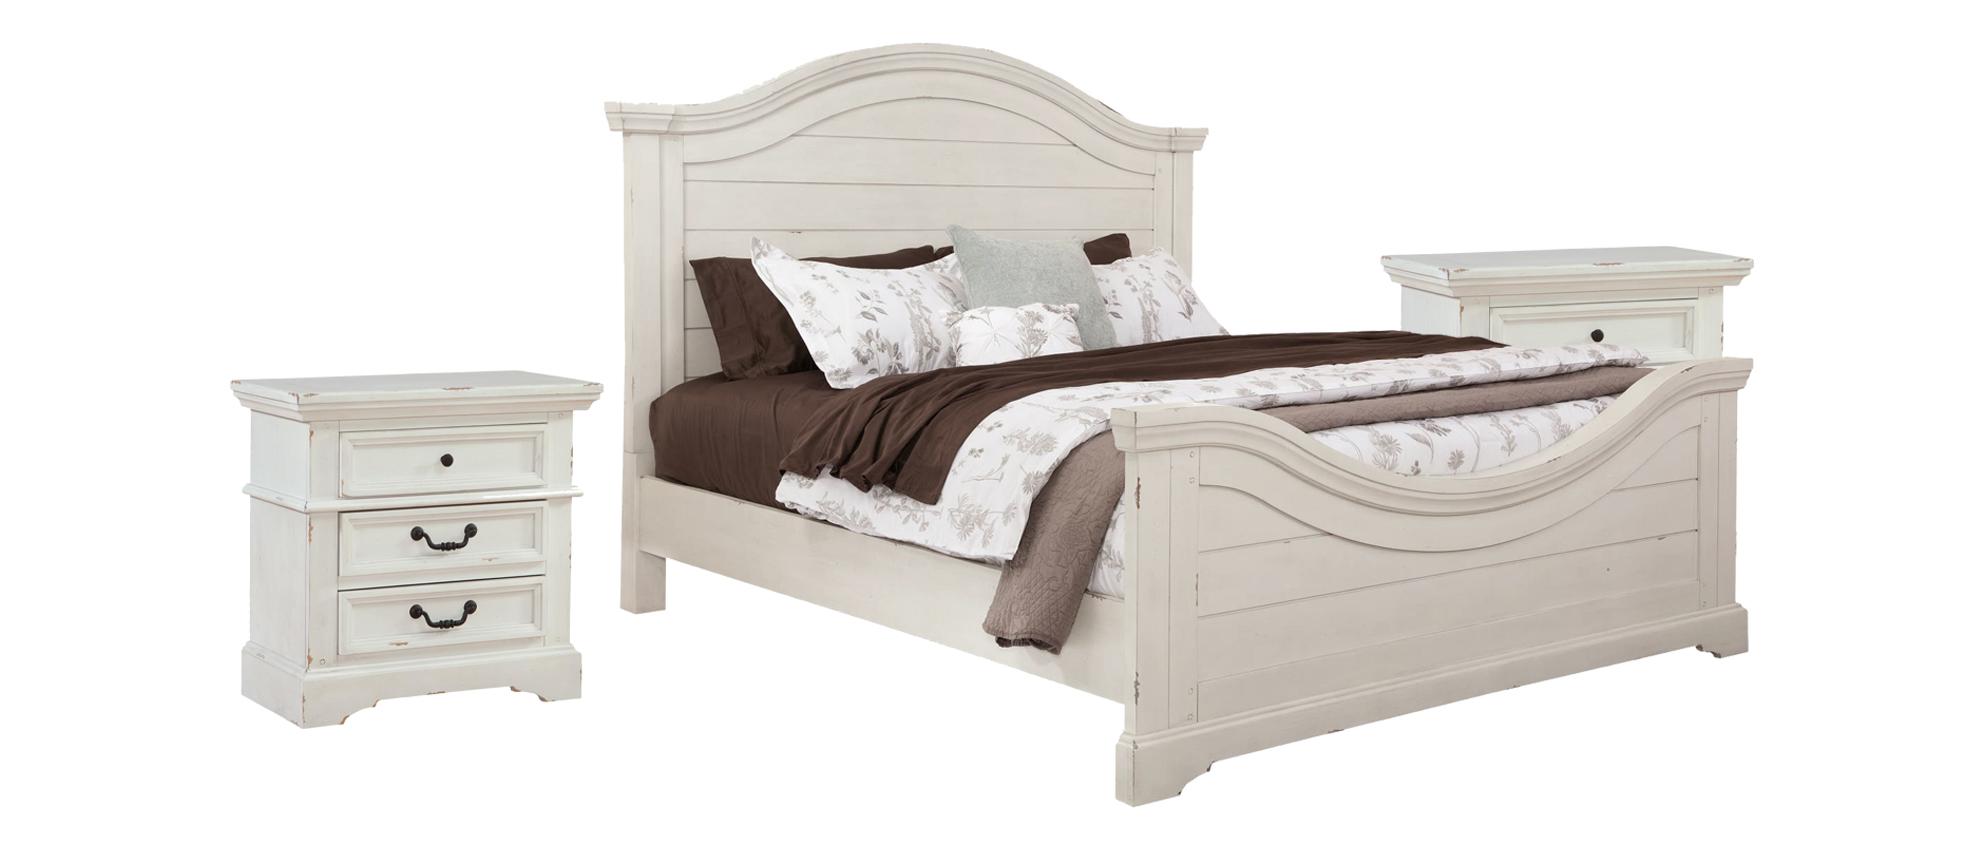 Classic, Traditional Panel Bedroom Set 7810 STONEBROOK 7810-50PAN-2N-3PC in Antique White 